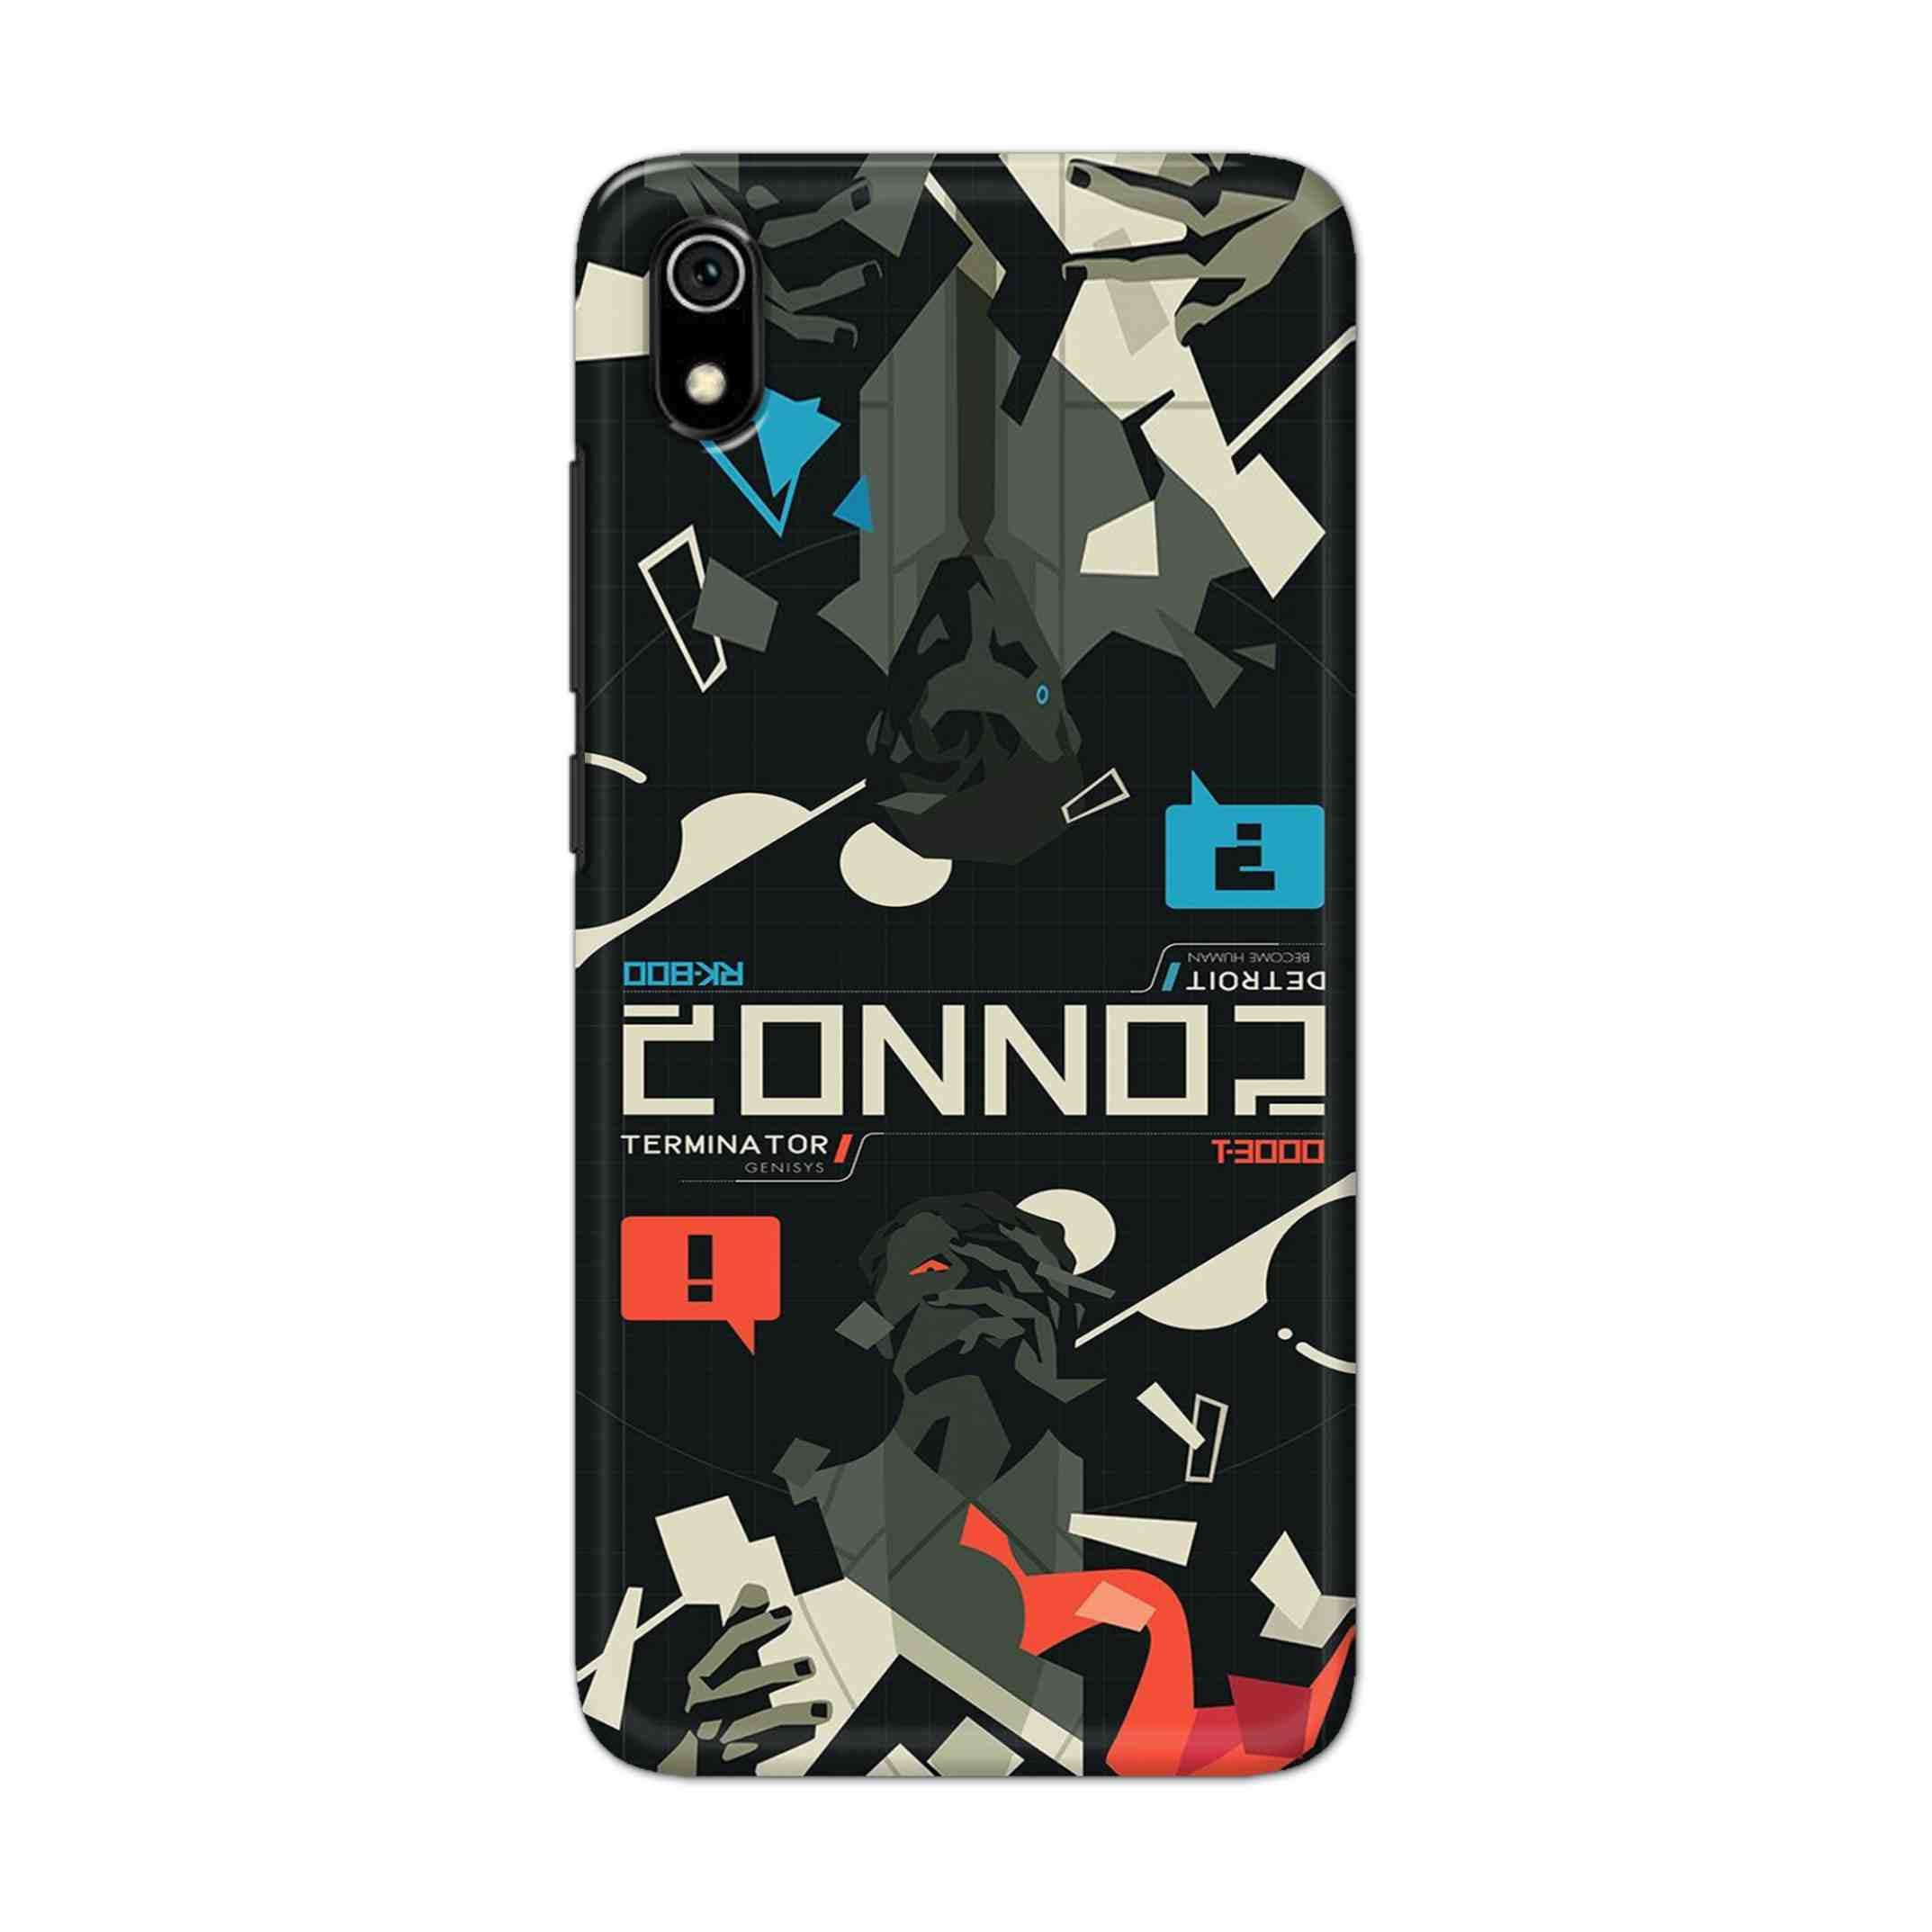 Buy Terminator Hard Back Mobile Phone Case Cover For Xiaomi Redmi 7A Online